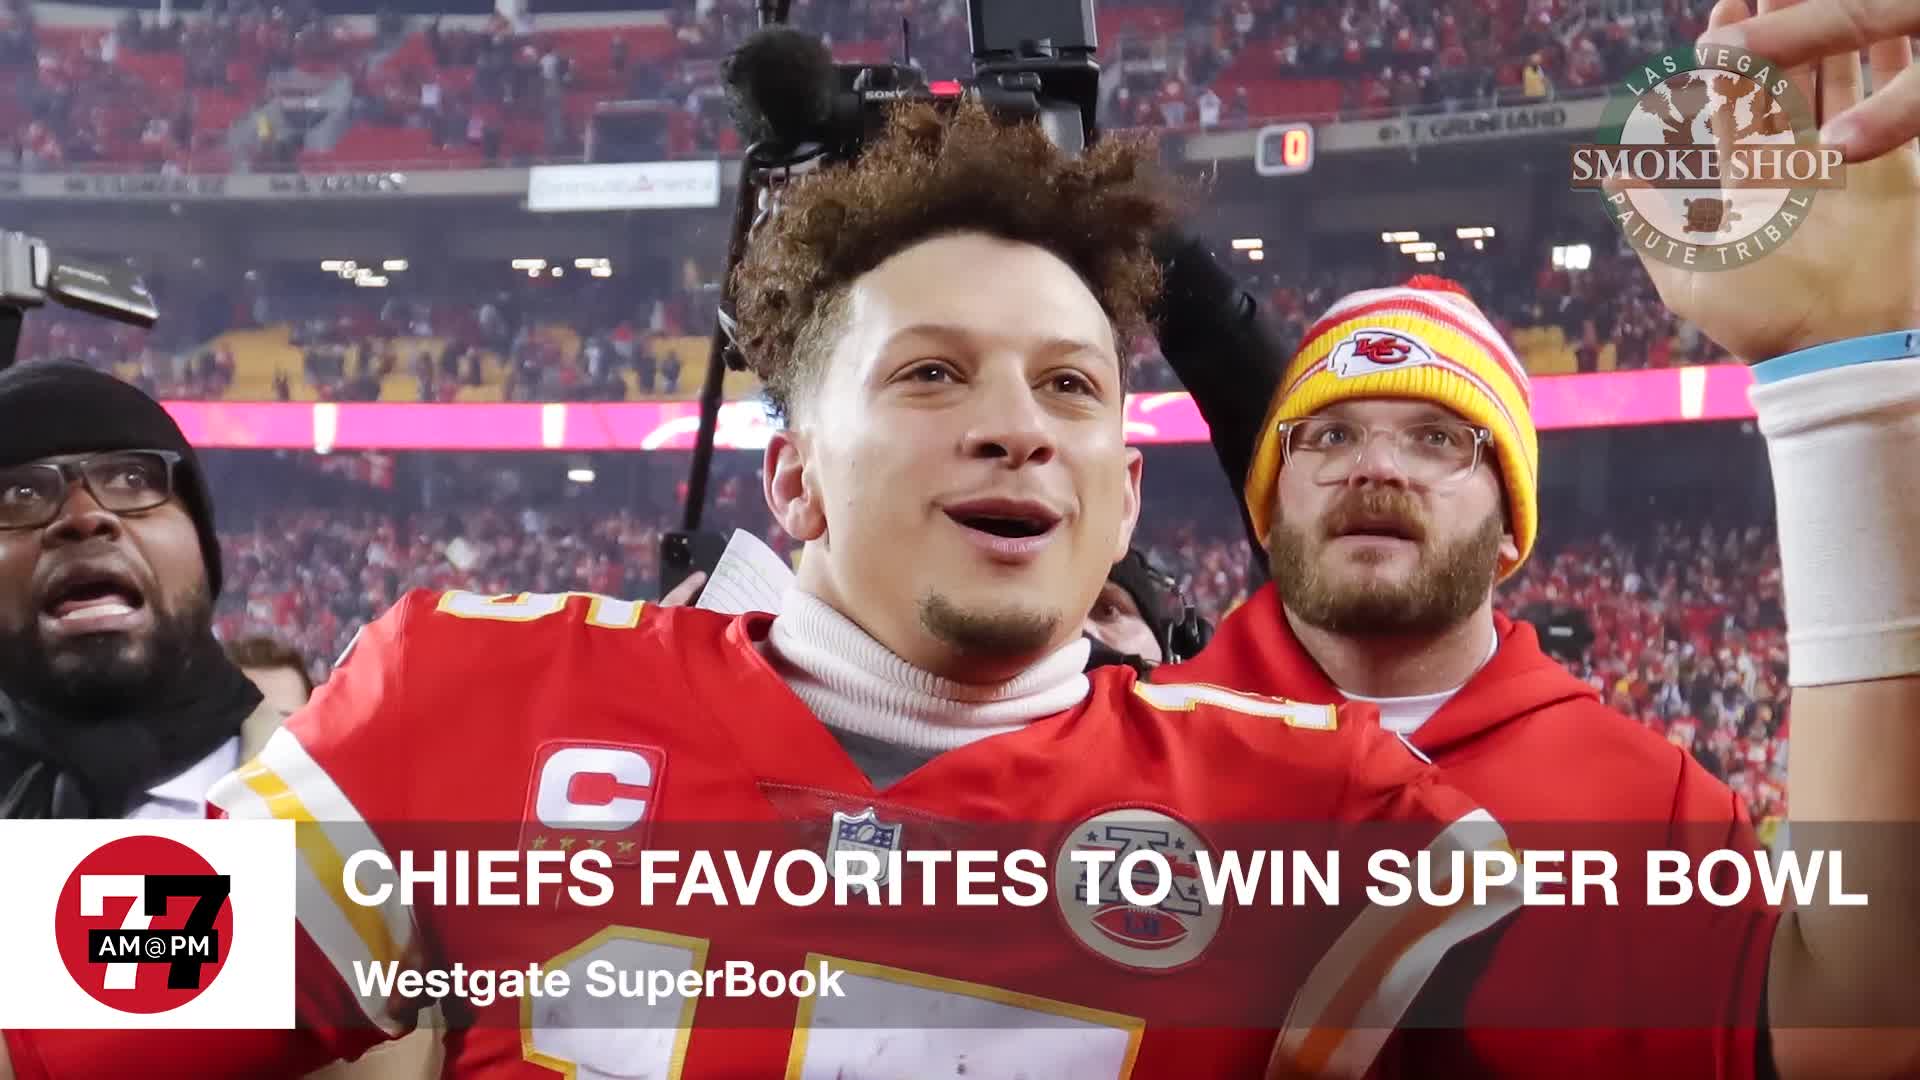 7@7PM Chiefs Favorites to Win Super Bowl